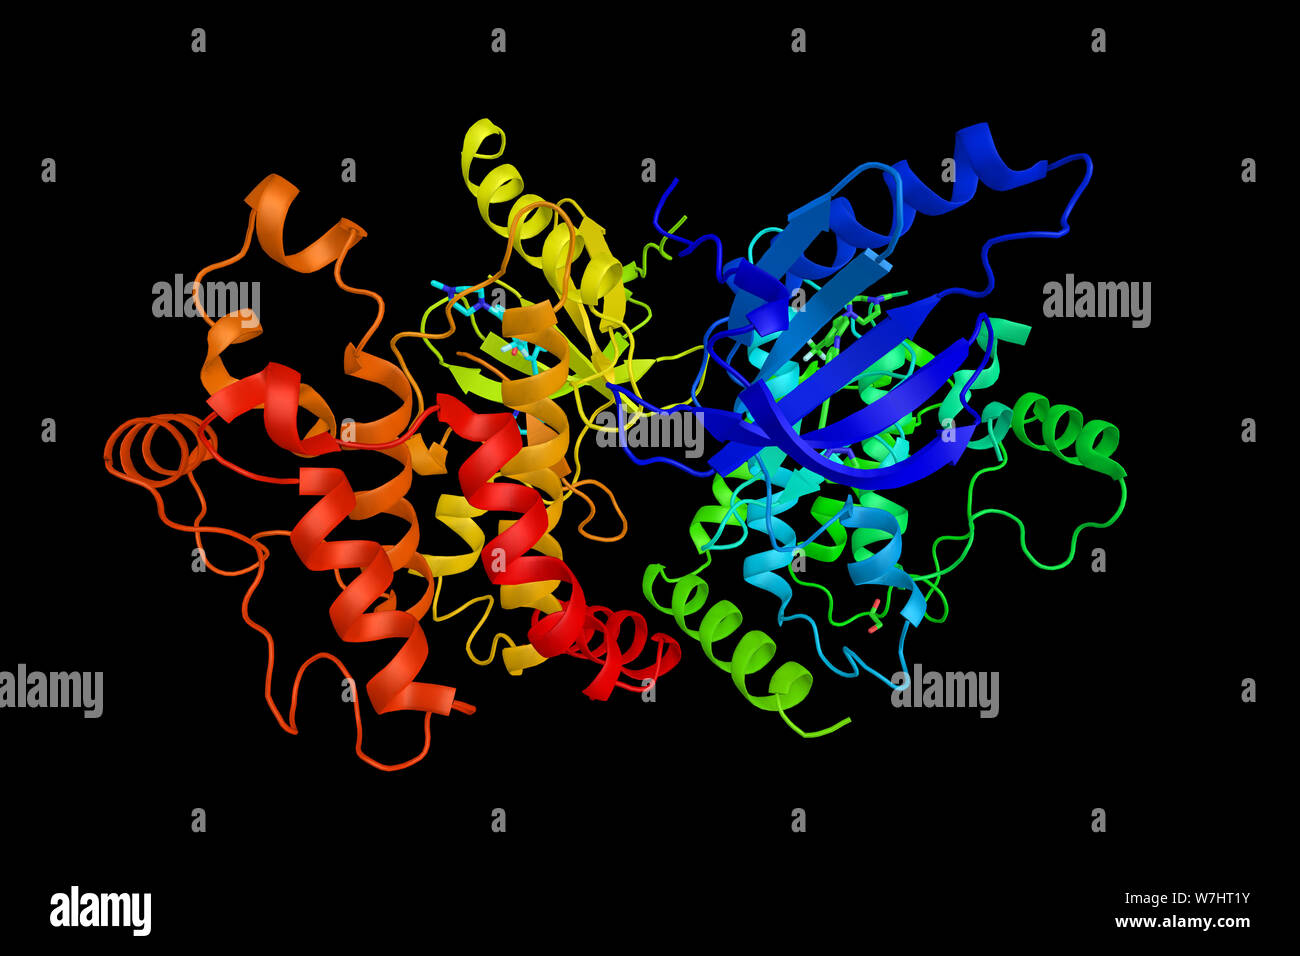 Receptor-interacting serine/threonine-protein kinase 2, an enzyme which is a component of signaling complexes in both the innate and adaptive immune p Stock Photo